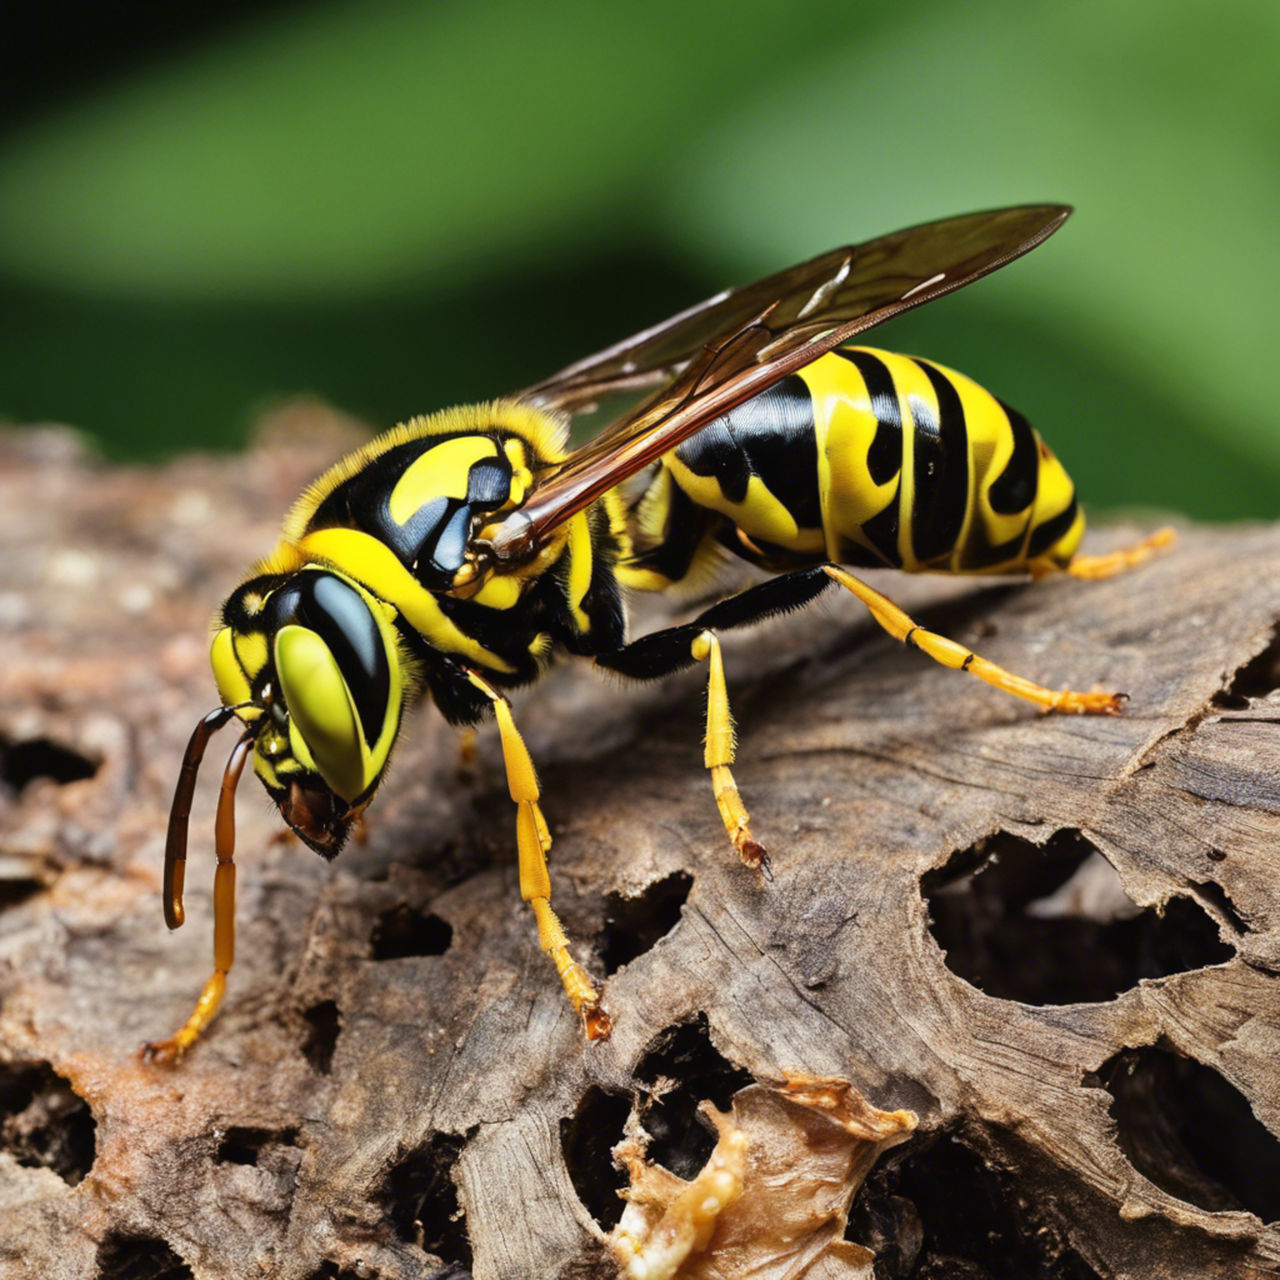 animal themes, animal, yellow, wasp, animal wildlife, one animal, wildlife, insect, macro photography, hornet, close-up, nature, focus on foreground, no people, outdoors, beauty in nature, animal body part, day